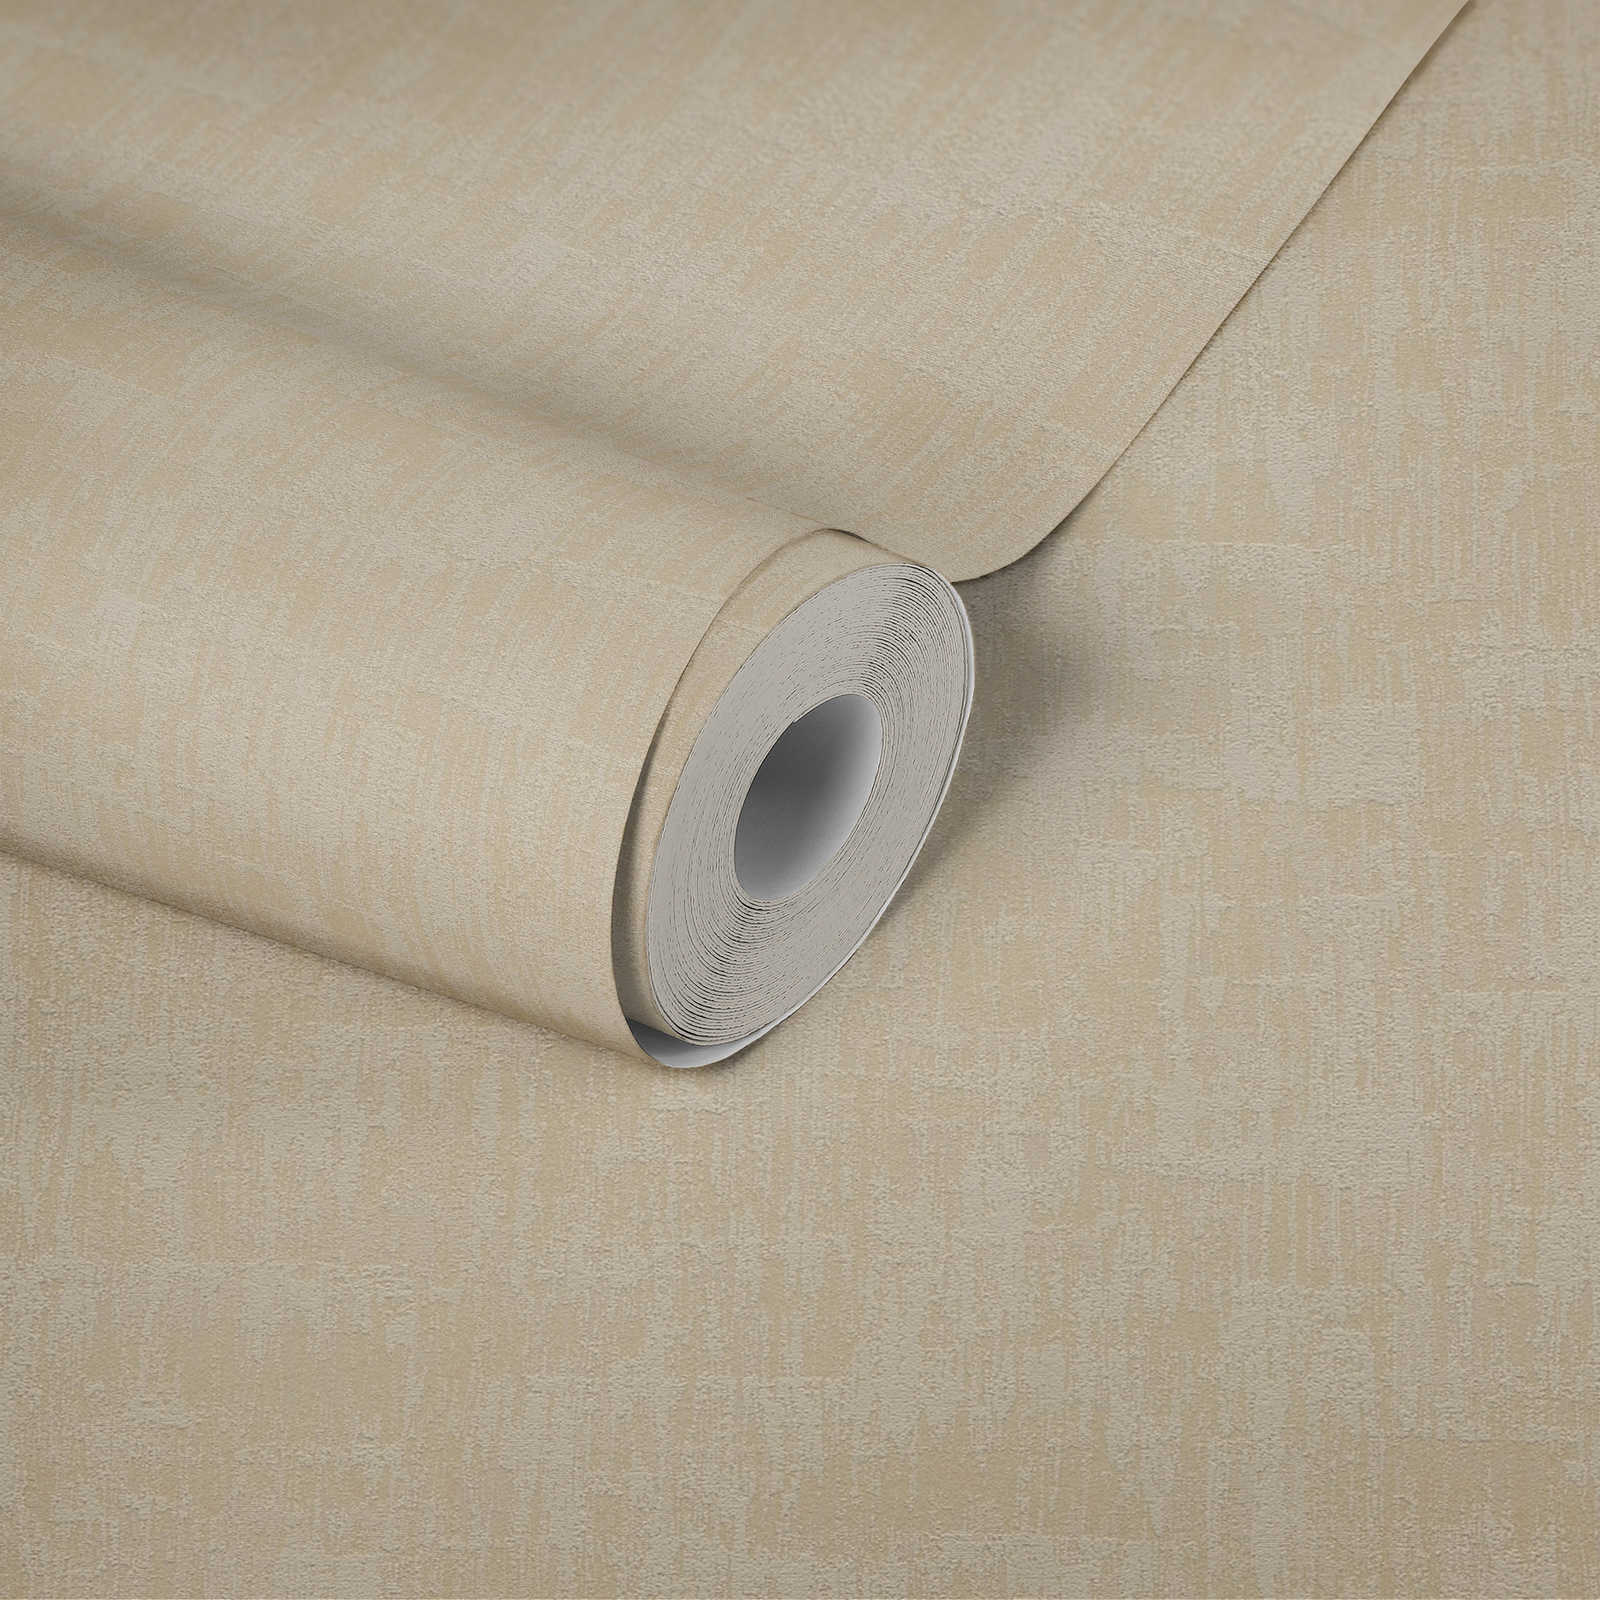             Wallpaper with abstract raffia pattern in soft colours - beige, taupe
        